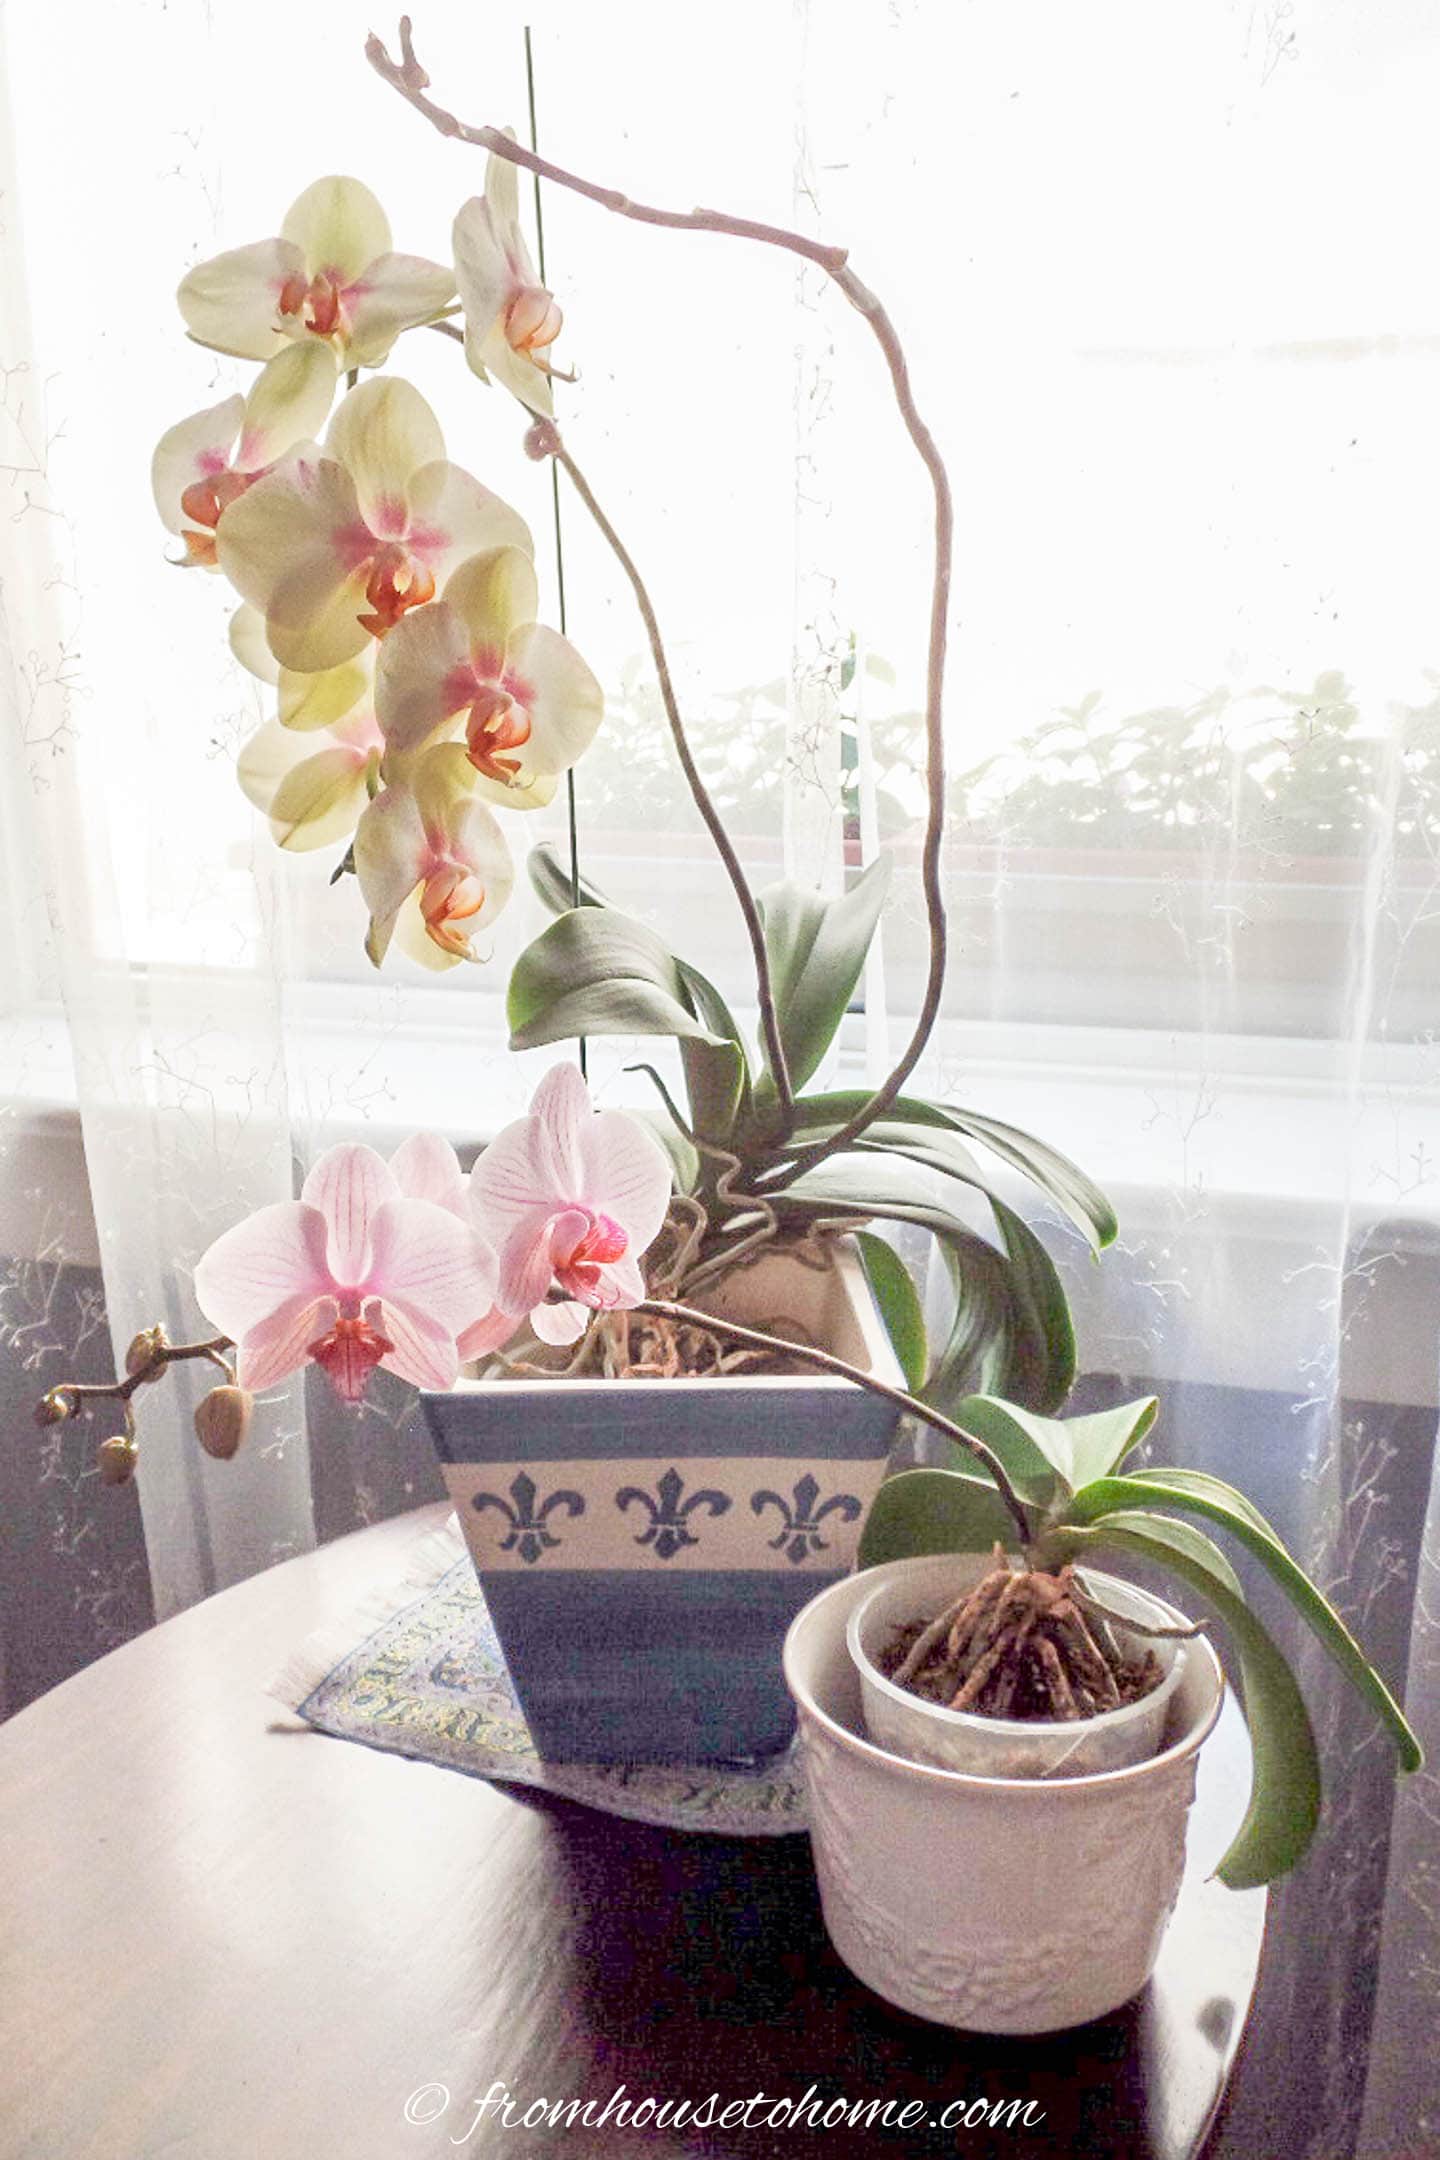 Phalaenopsis orchids growing in a pot on a living room table